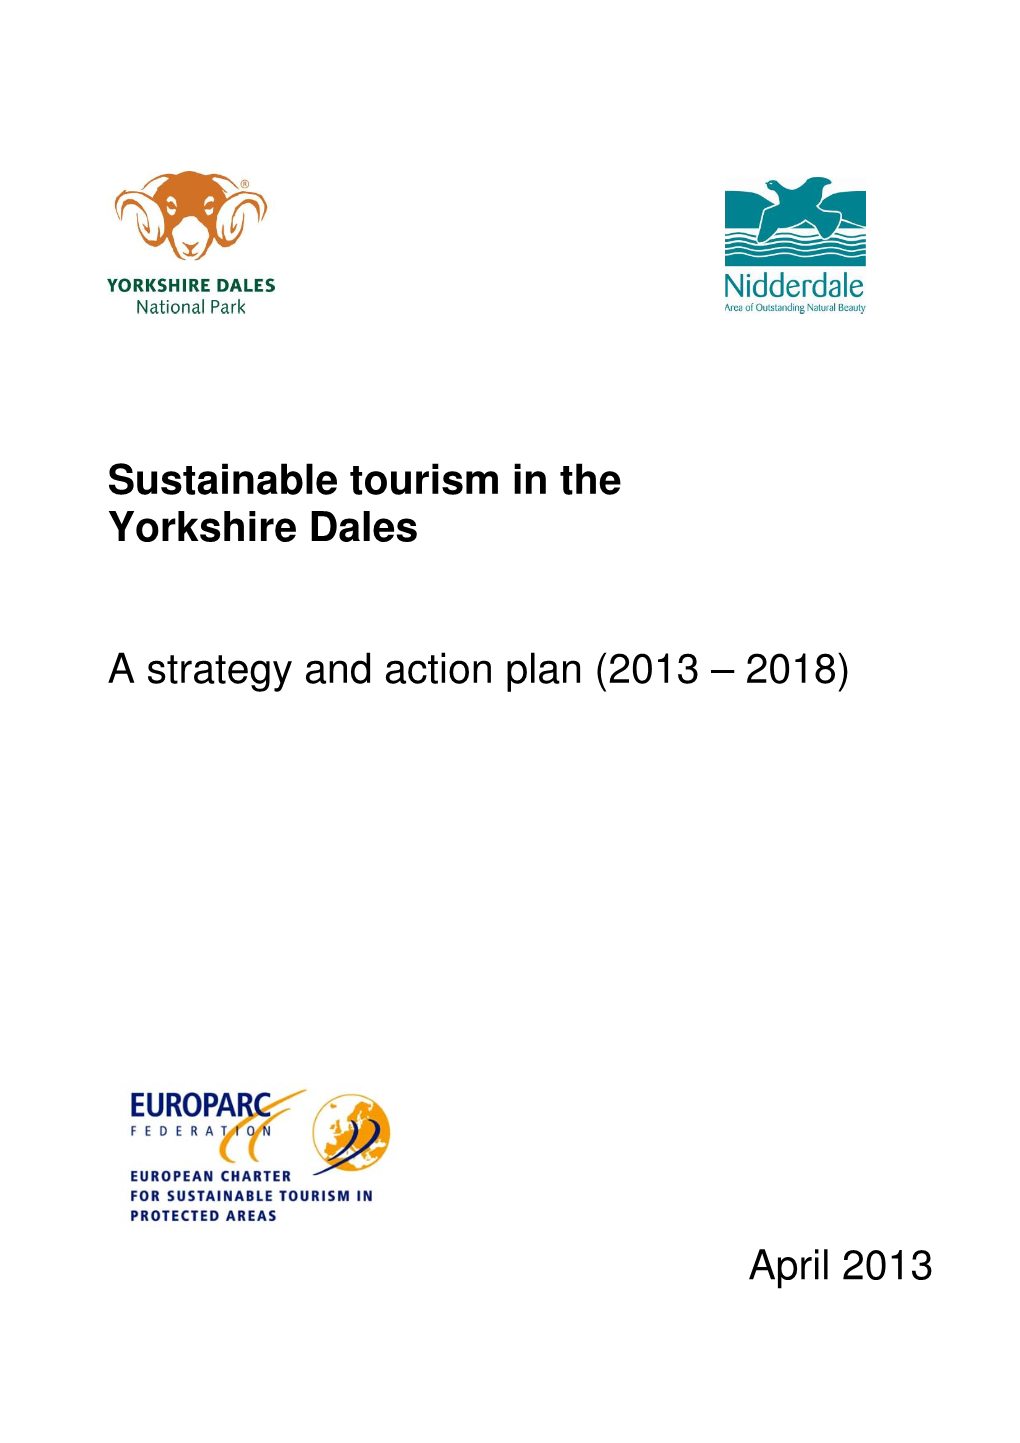 Sustainable Tourism in the Yorkshire Dales a Strategy and Action Plan